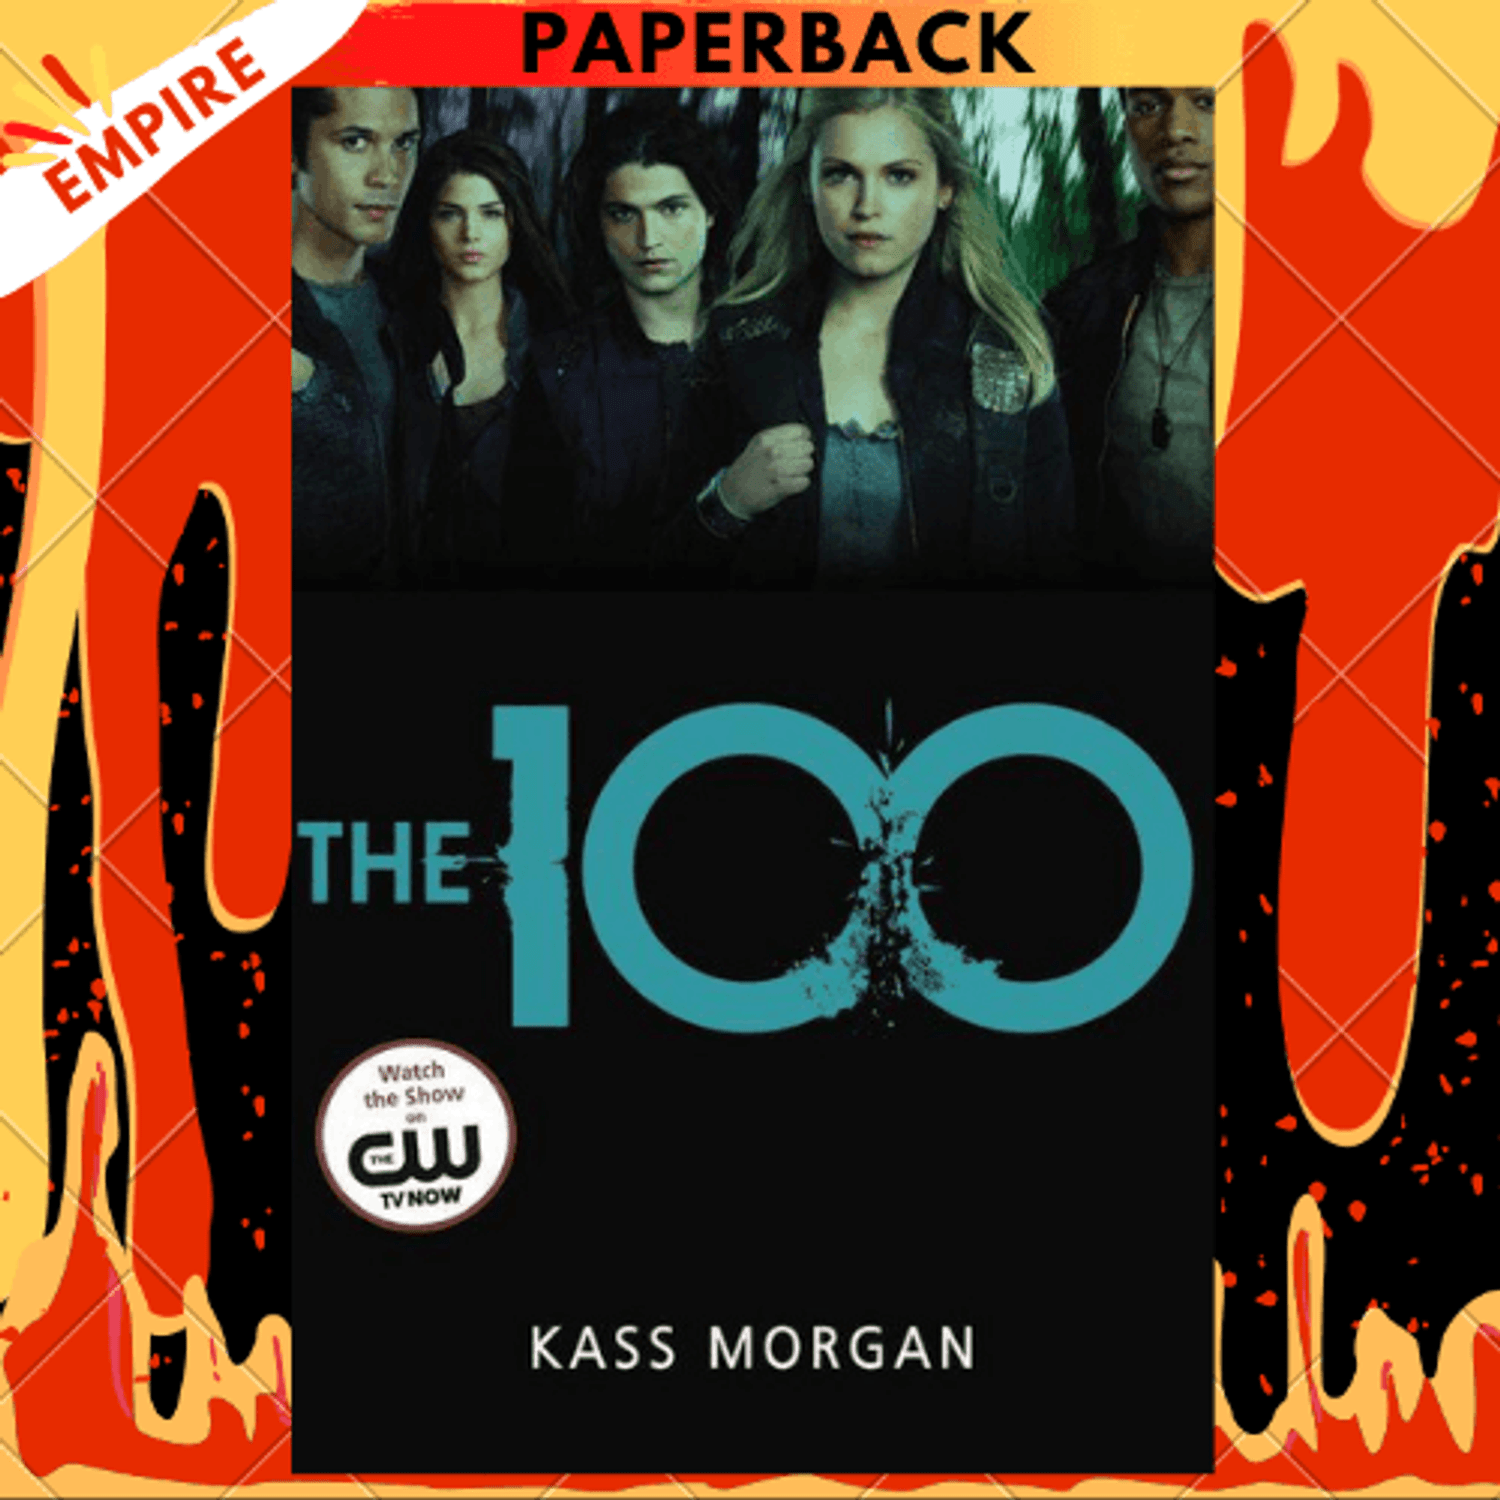 The 100 (The 100 Series #1) by Kass Morgan